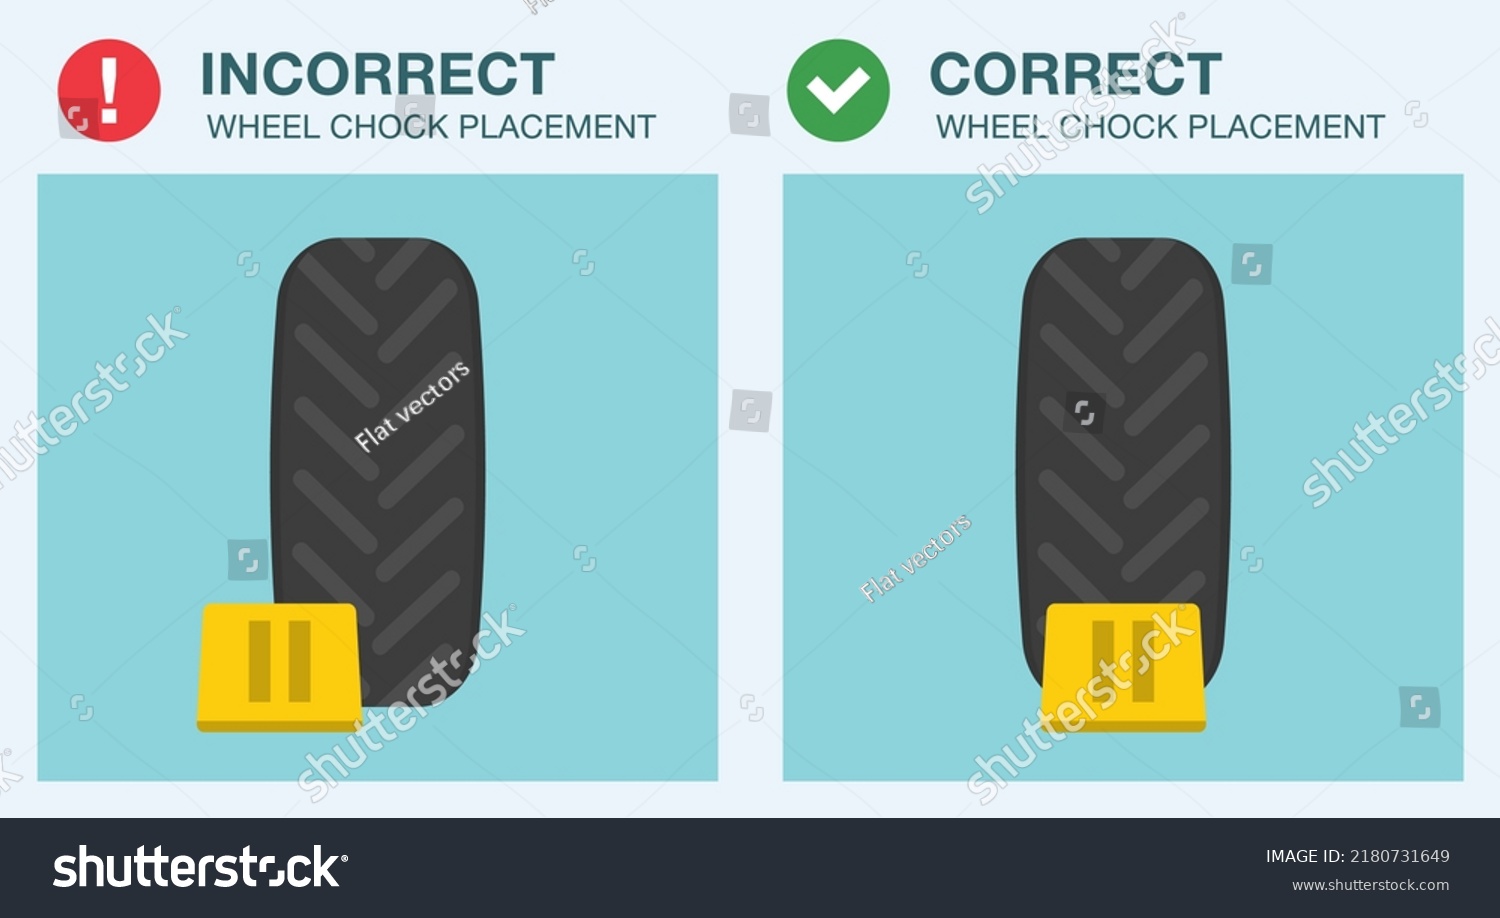 SVG of Safe driving rules and tips. Close-up view of wheel stopper or chocks. Correct and incorrect wheel block placement. Flat vector illustration template. svg